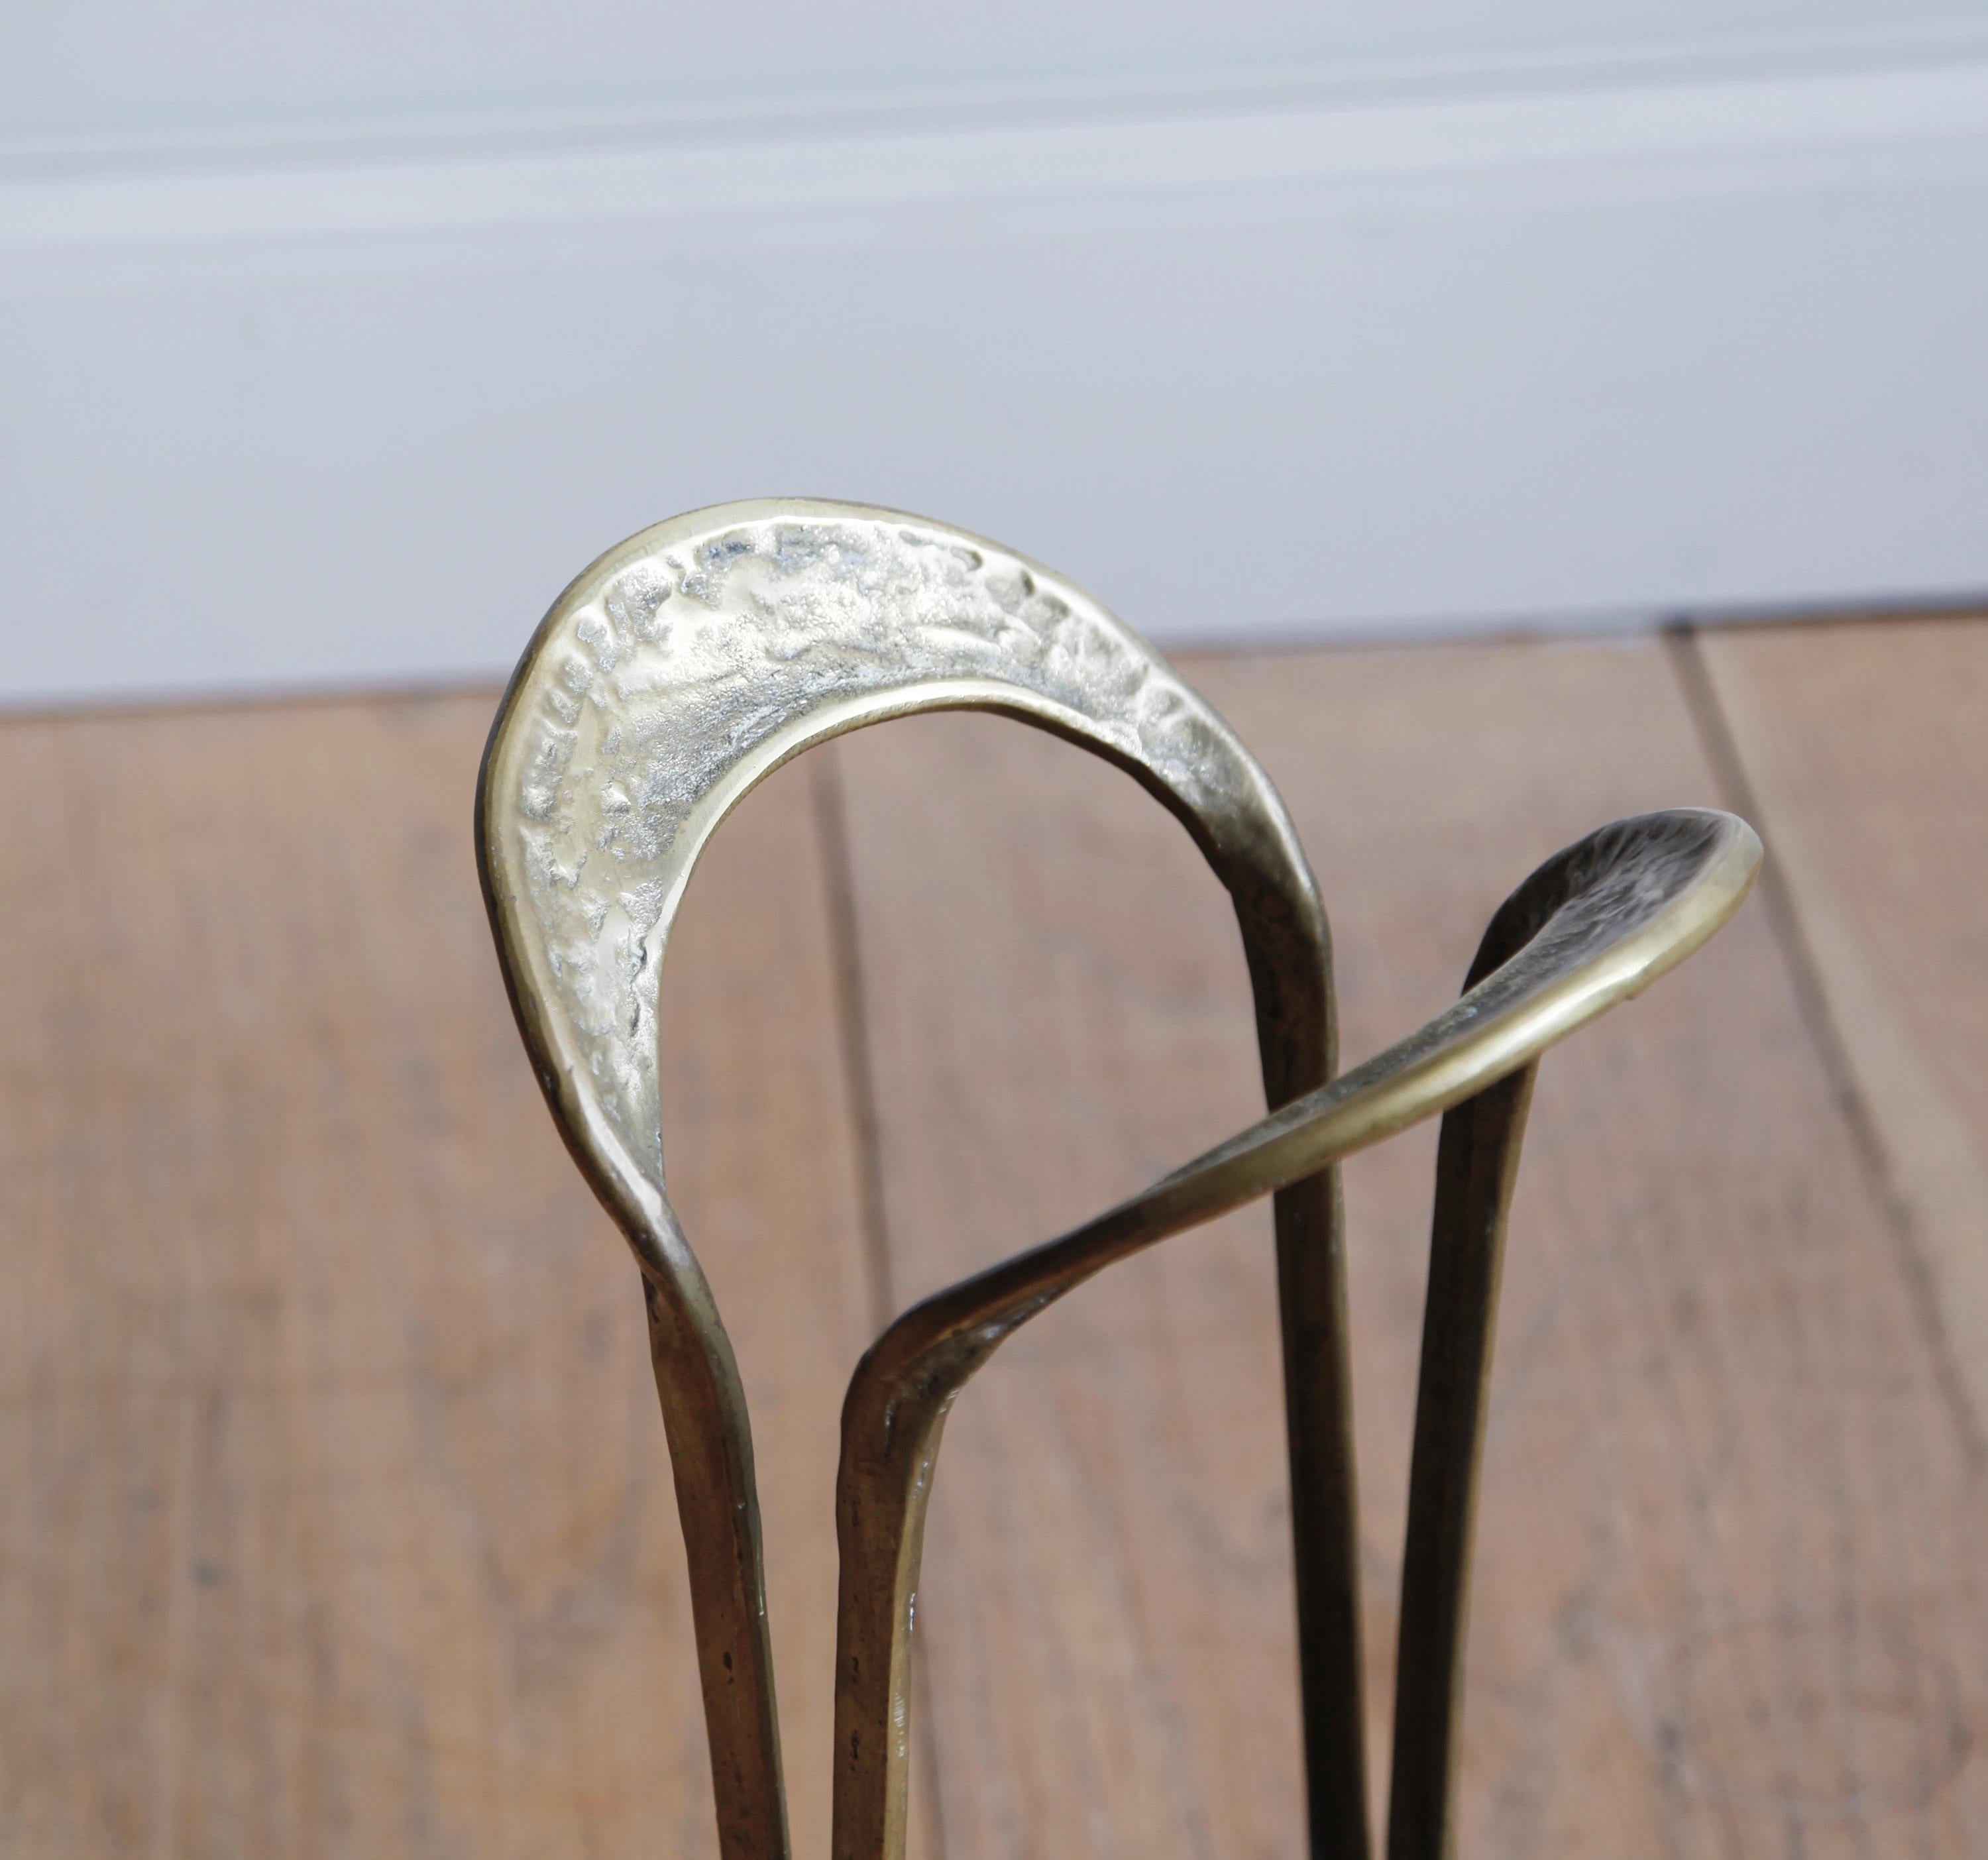 Simply beautiful, this streamlined brass stand will hold half a dozen walking sticks, or a few handsome umbrellas.